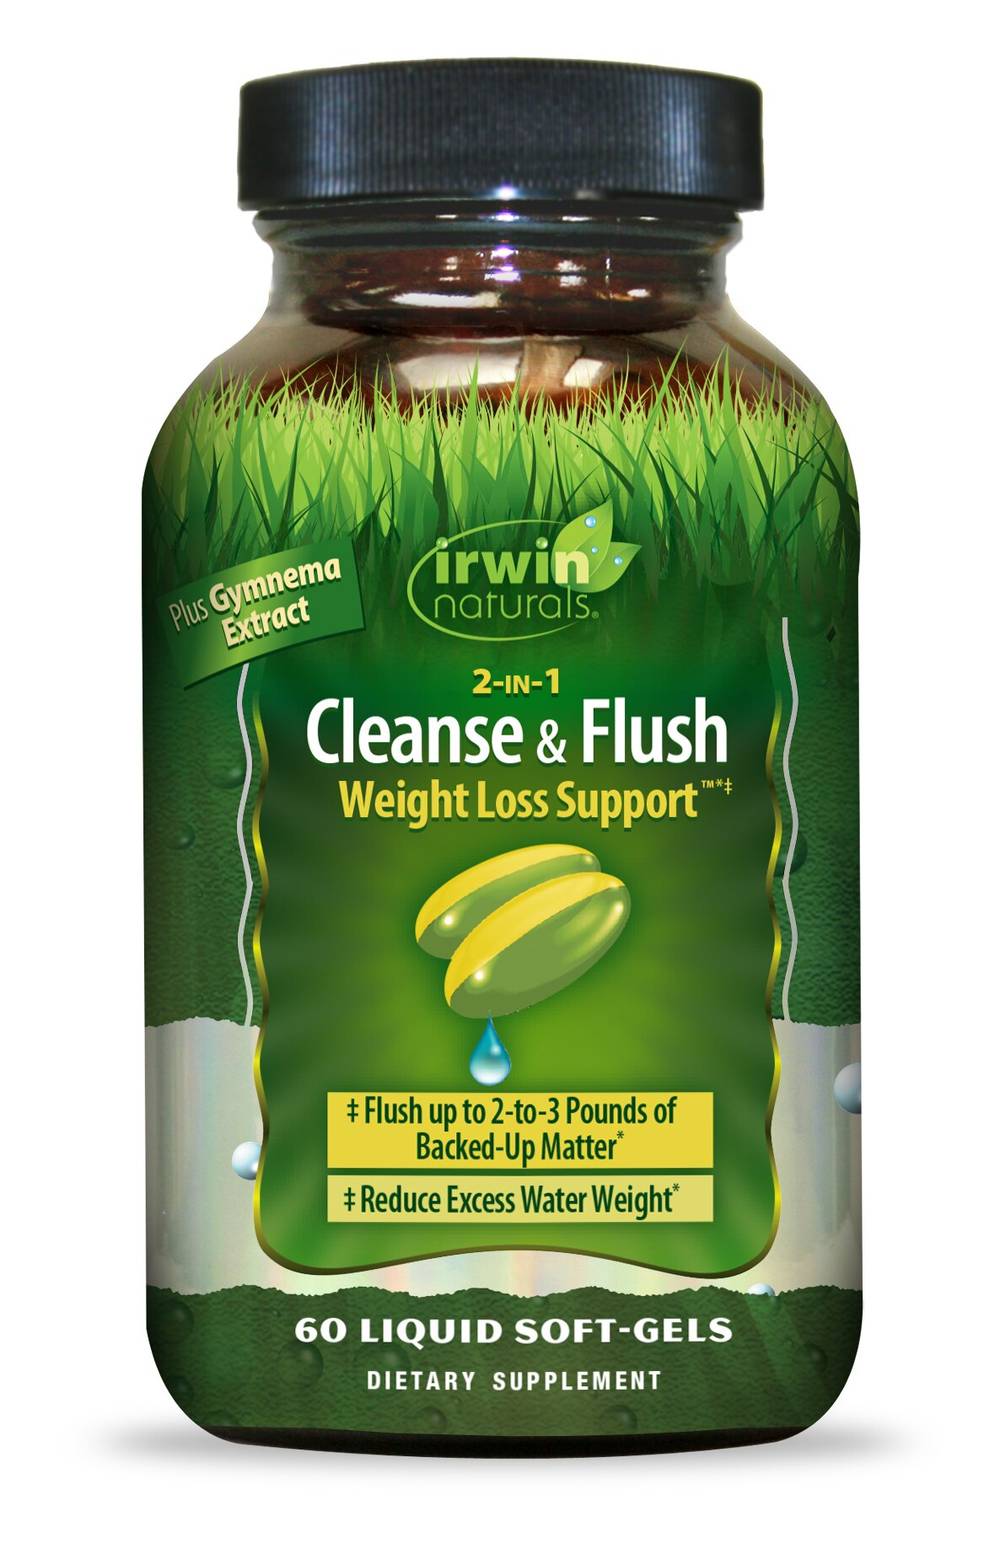 Irwin Naturals 2-in-1 Cleanse & Flush Weight Loss Support Soft-Gels